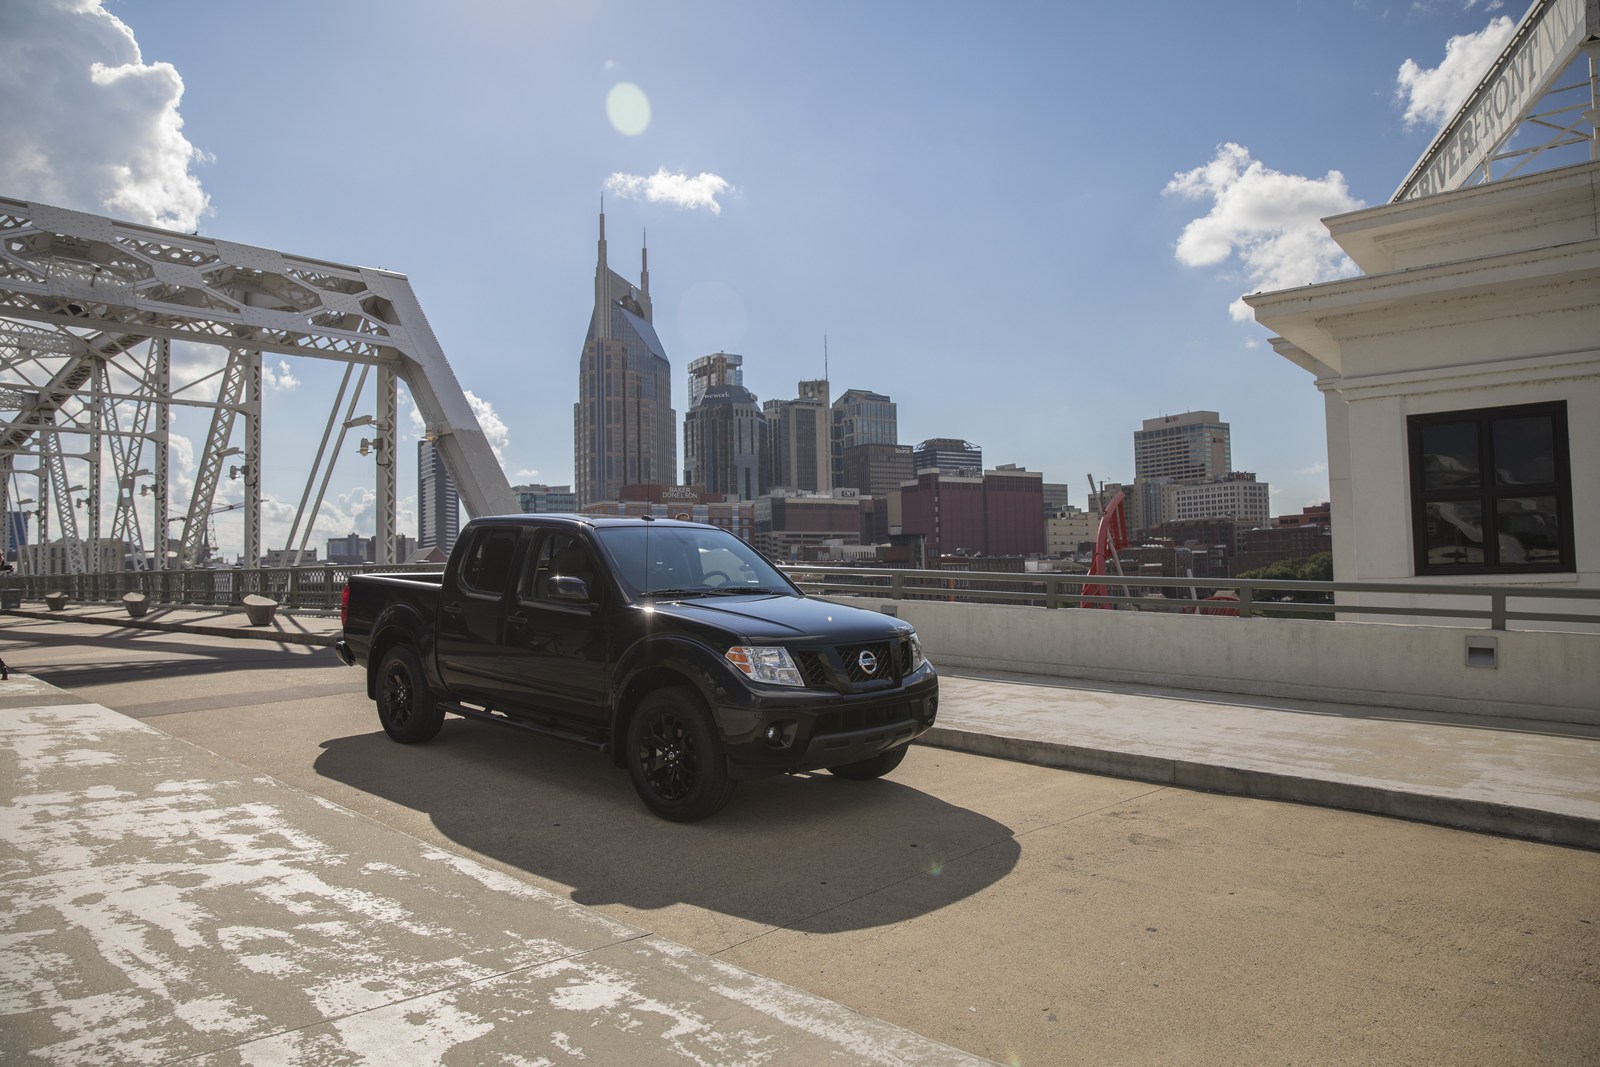 As the solar eclipse darkened the midday sky over Nissan’s U.S. headquarters in Franklin, Tenn., the company rolled out three new additions to its popular and hot selling portfolio of custom Midnight Edition models: TITAN, TITAN XD and Frontier Midnight Editions. Nissan’s Midnight Editions sell on average two times faster than standard models.